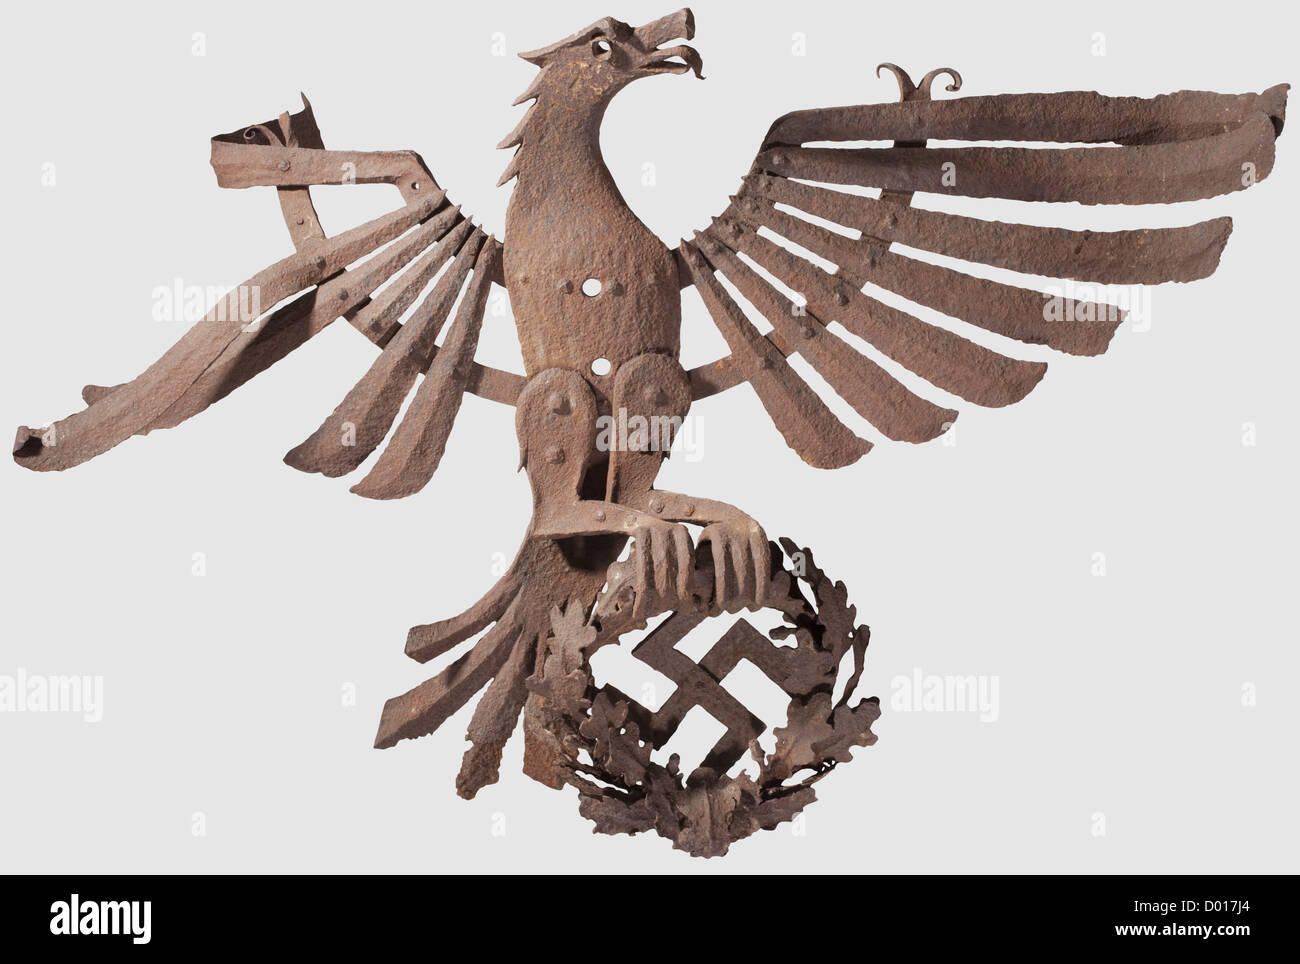 A large,wrought iron wall eagle,Assembled from several pieces with separate riveted feathers and an oak leaf wreath worked in relief. Dimensions ca. 95 x 140 cm. Bent and corroded excavation find,historic,historical,1930s,1930s,20th century,party organisation,party organization,organisations,organizations,organization,organisation,party,parties,political party,German,Germany,NS,National Socialism,Nazism,Third Reich,German Reich,utensil,piece of equipment,utensils,object,objects,stills,clipping,clippings,cut out,cut-out,cut-outs,Additional-Rights-Clearences-Not Available Stock Photo